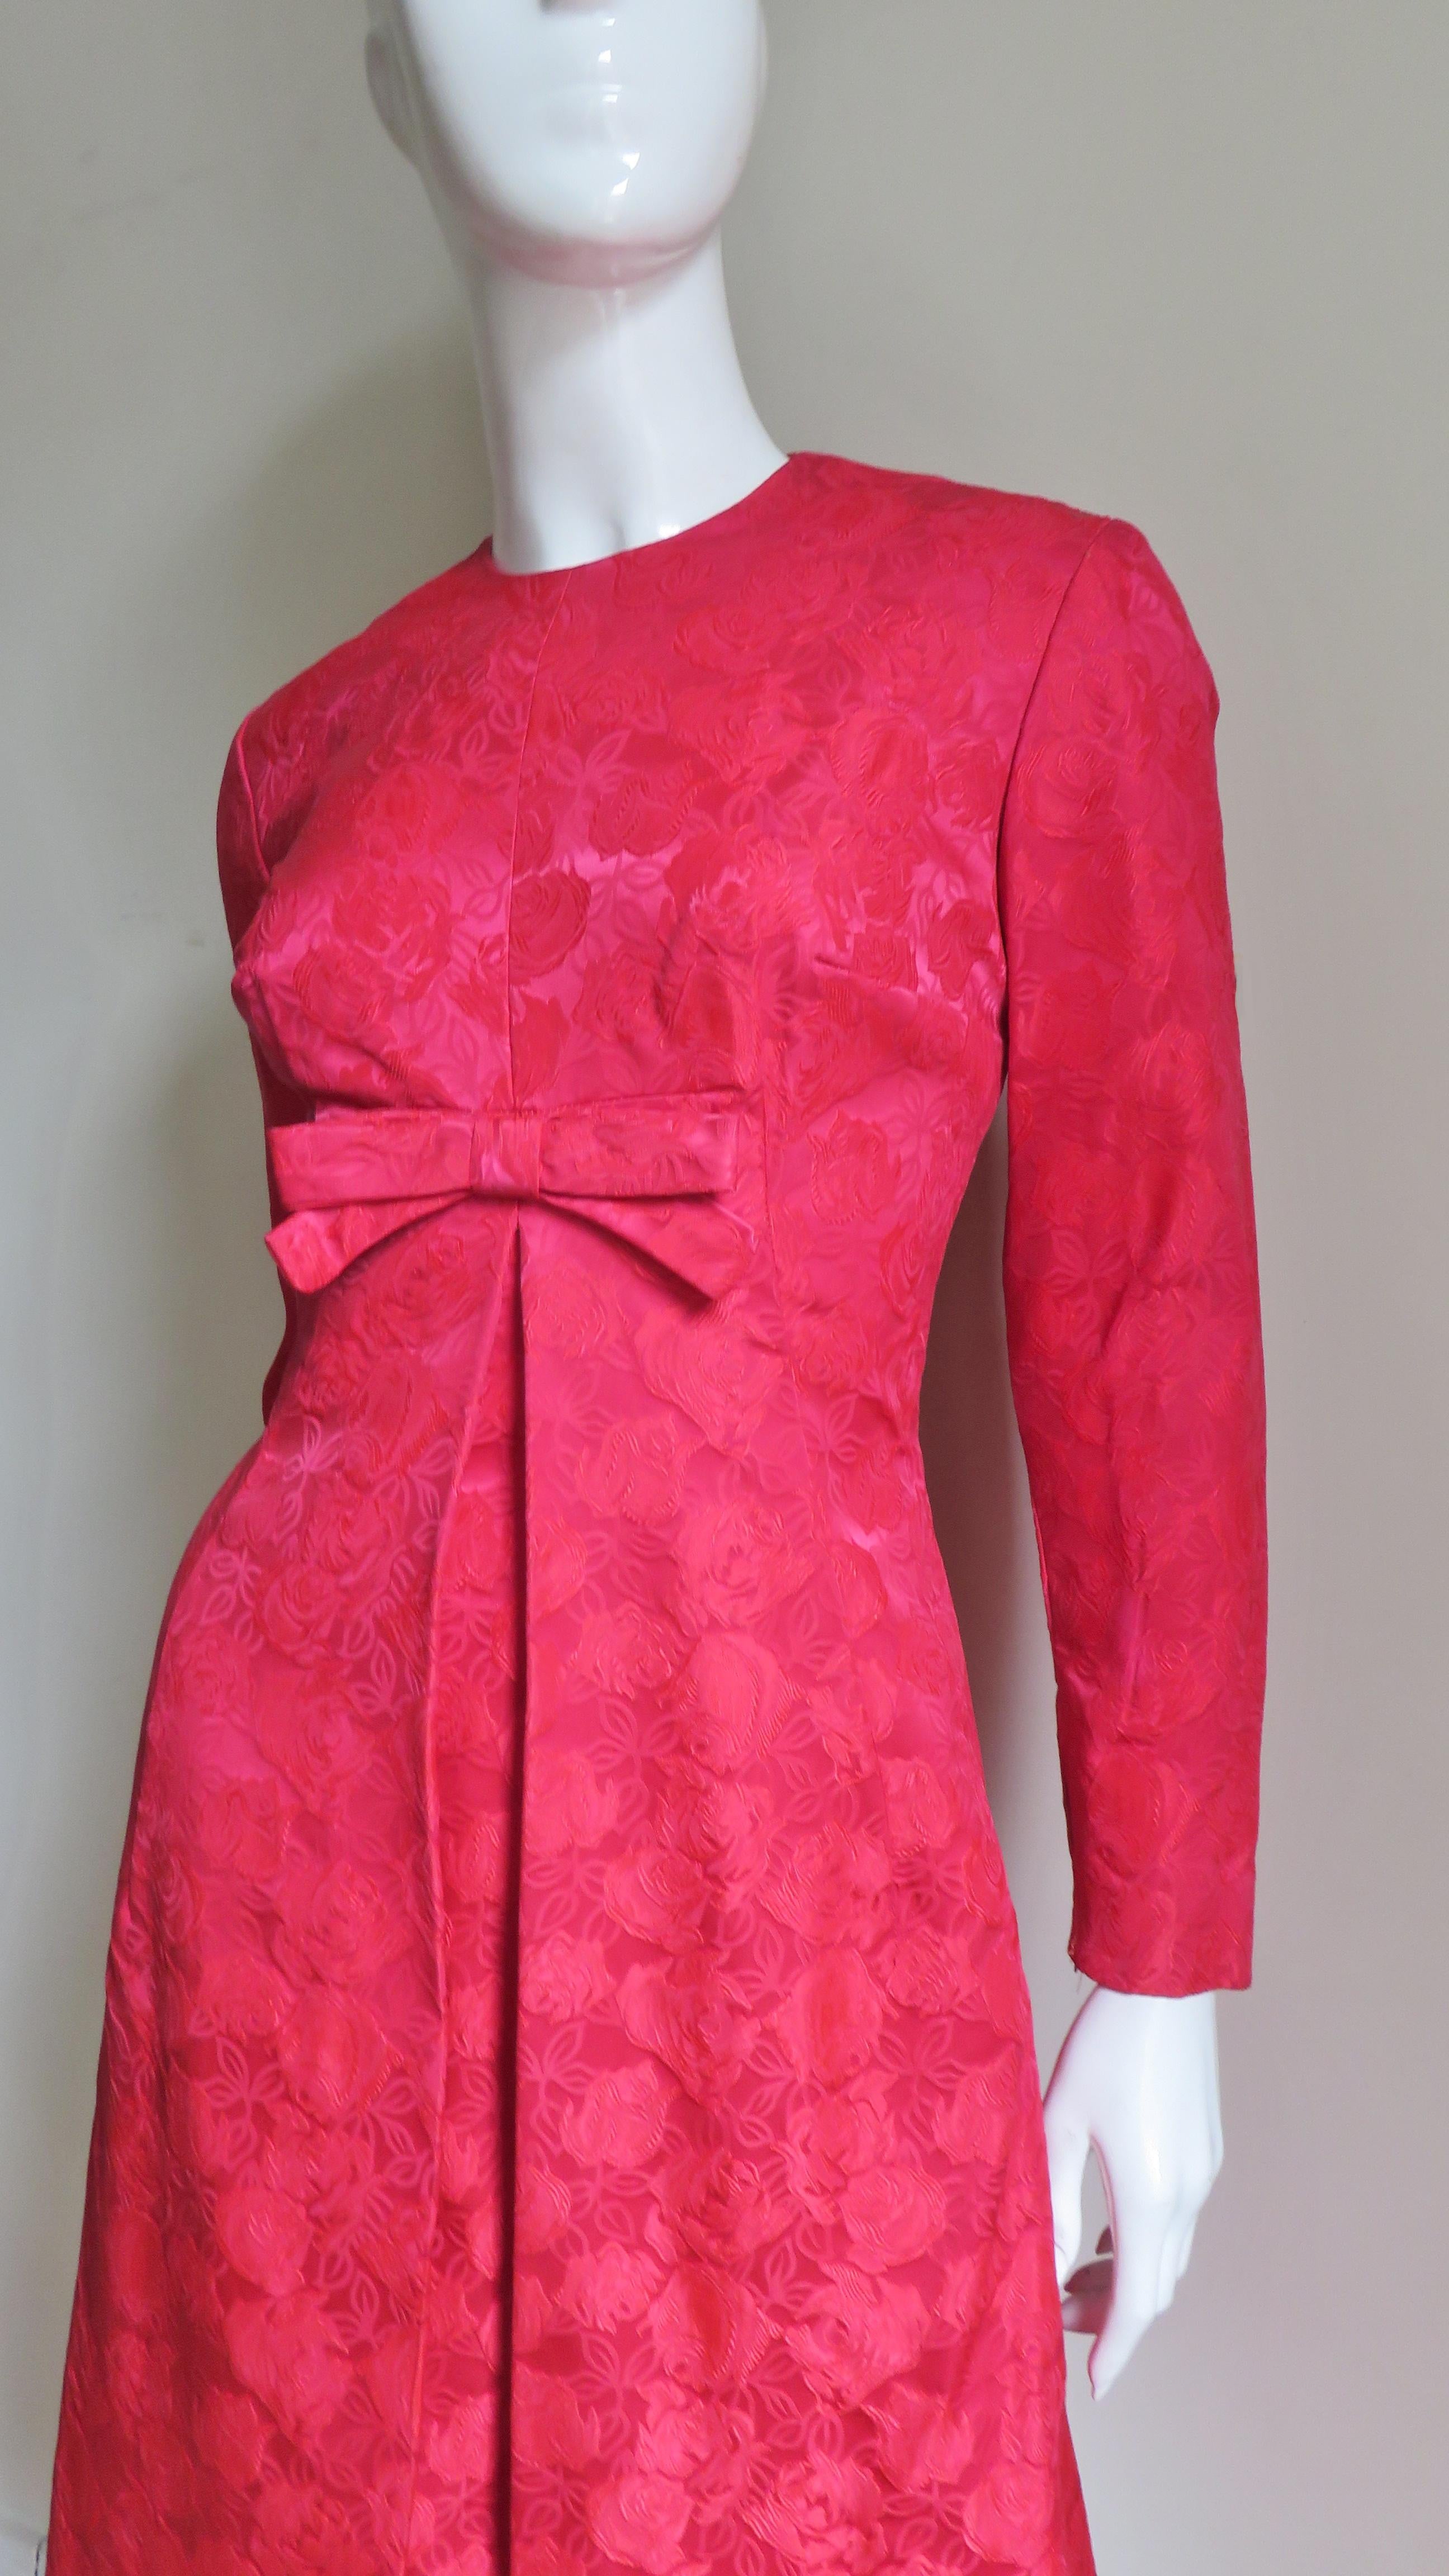 Suzy Perette New Damask Dress and Overdress 1950s 6